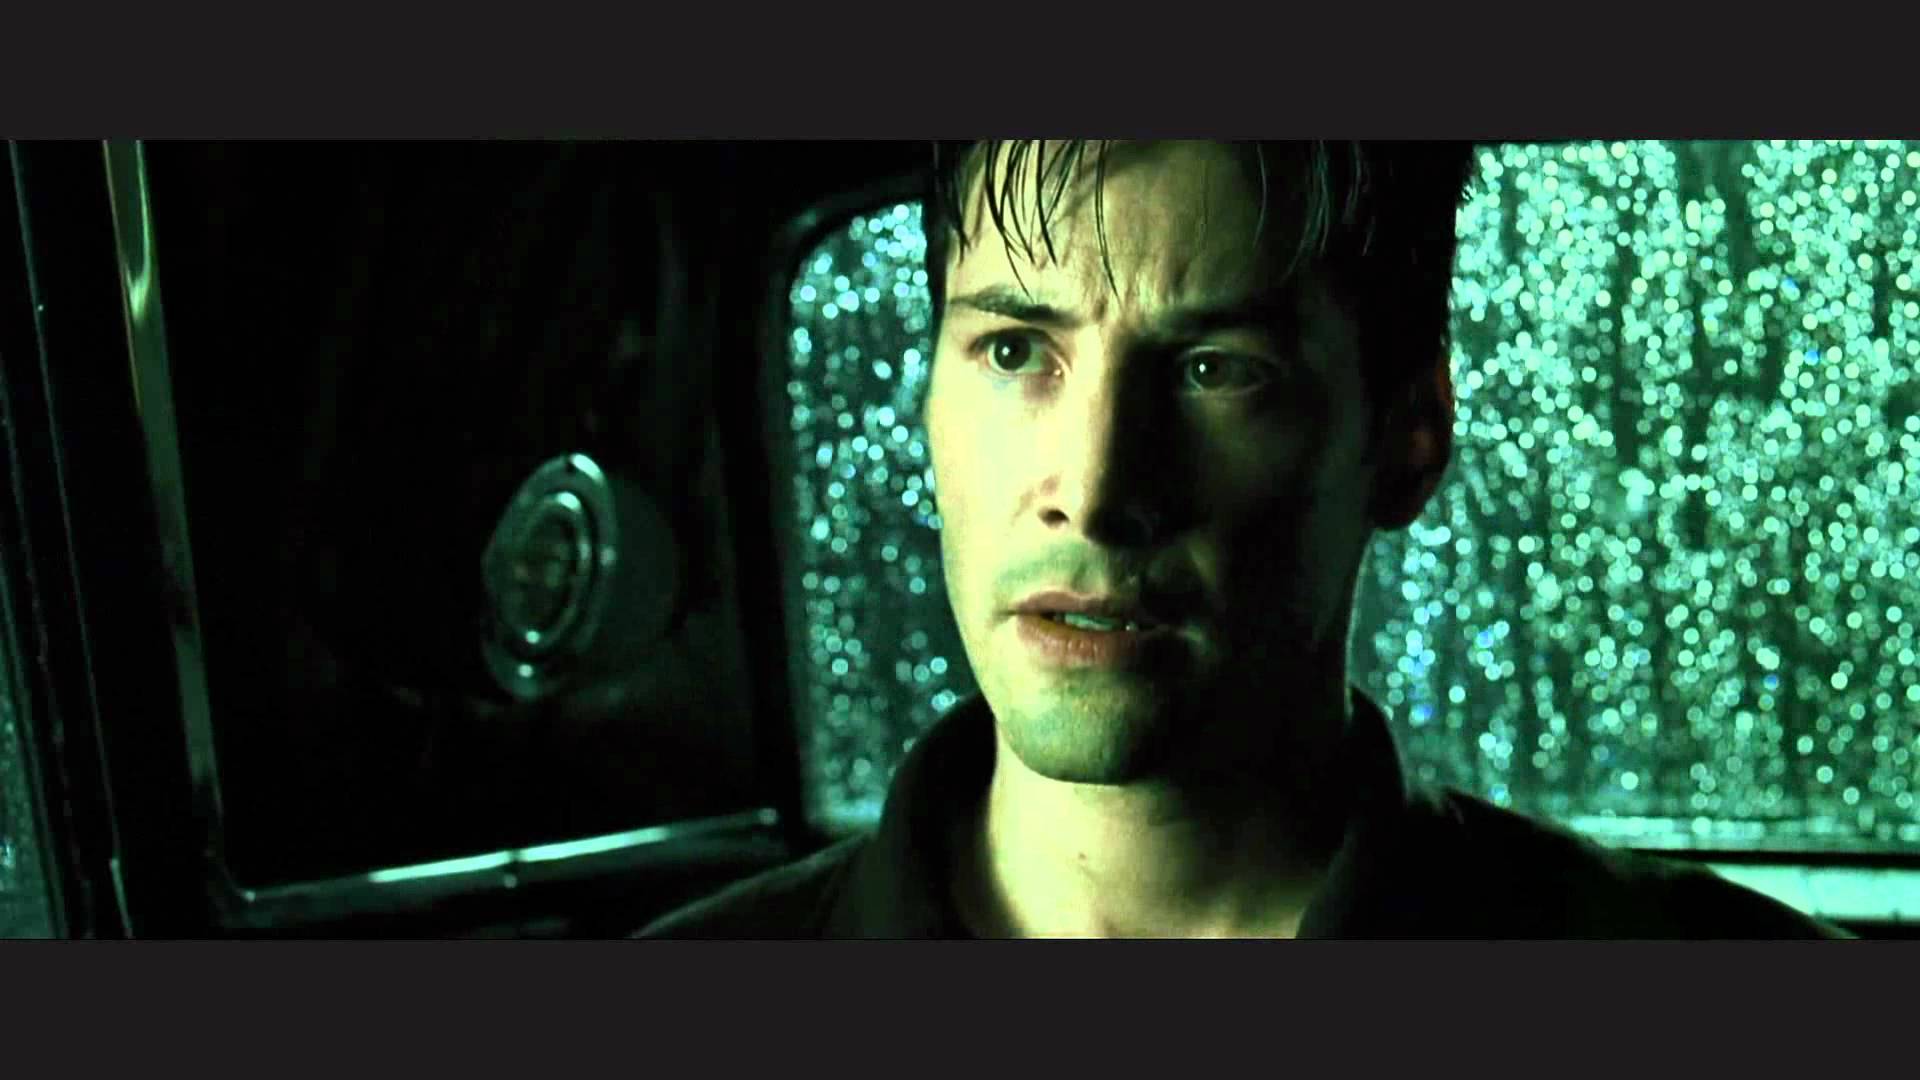 In The Matrix, water on windows foreshadowed code